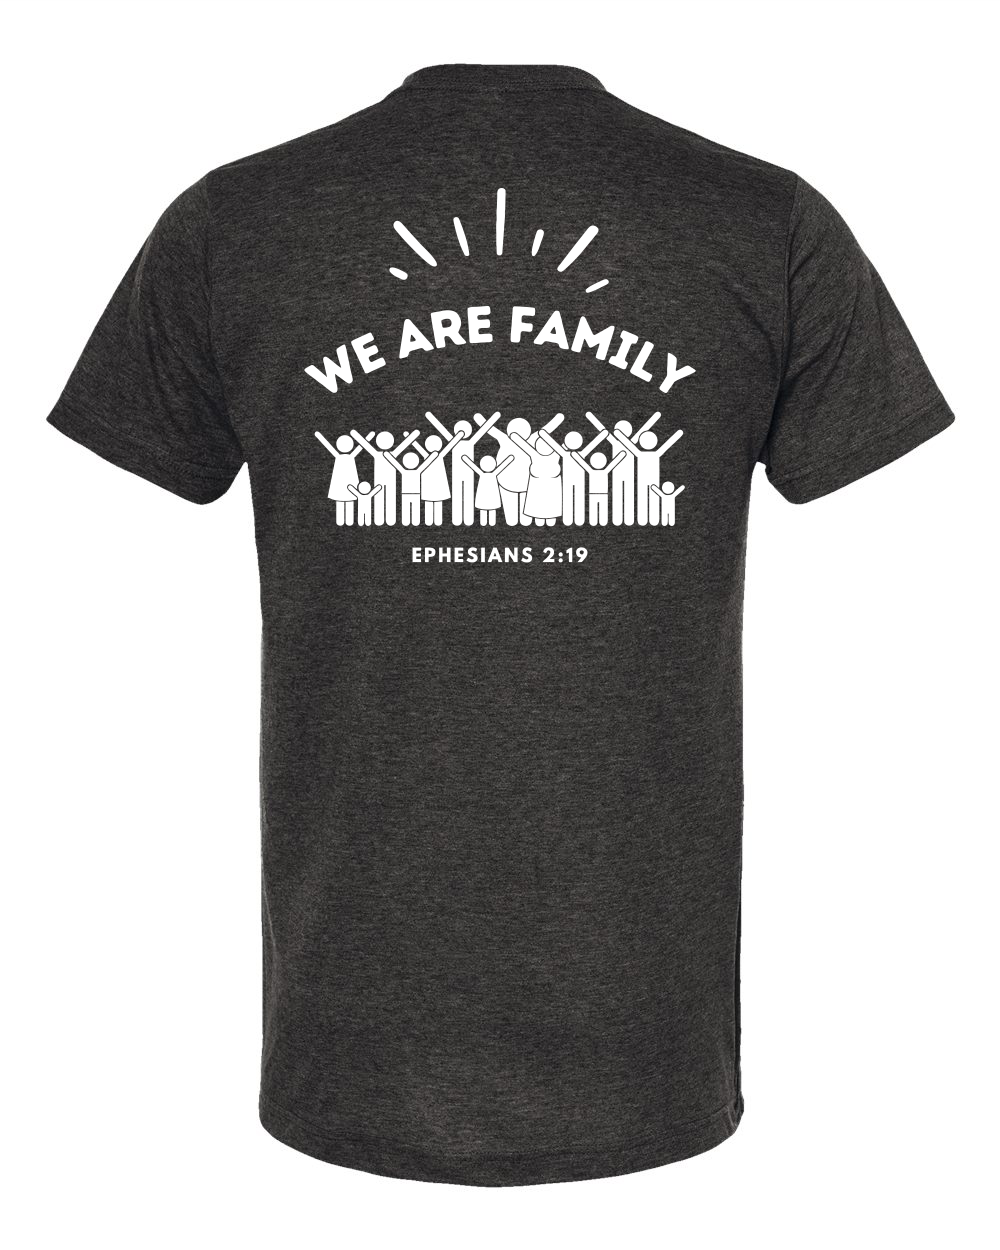 We are Family Youth T-Shirt